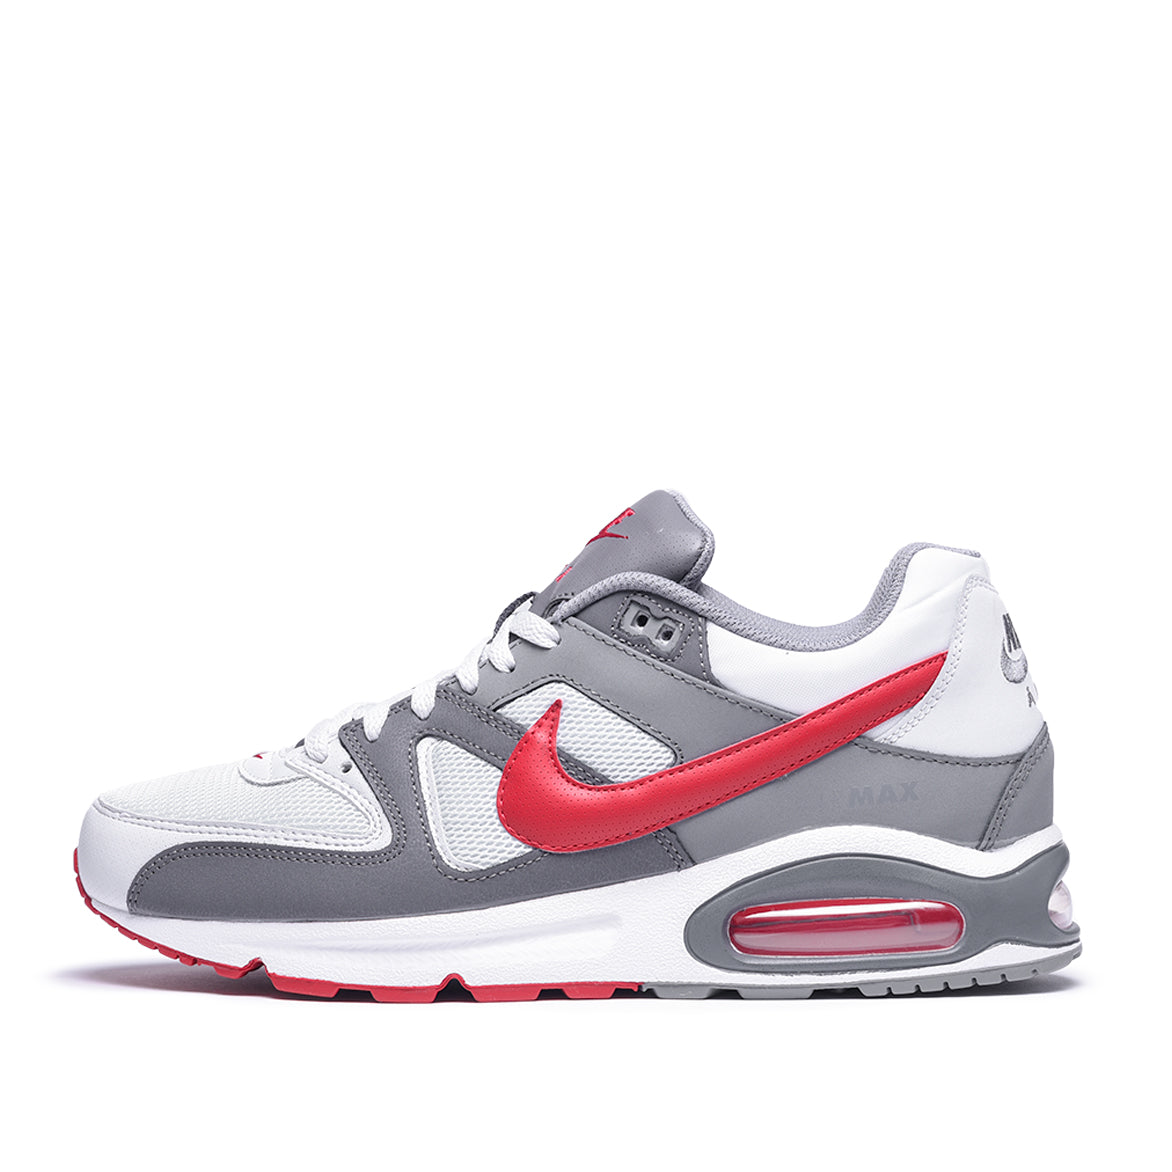 nike air max command red black